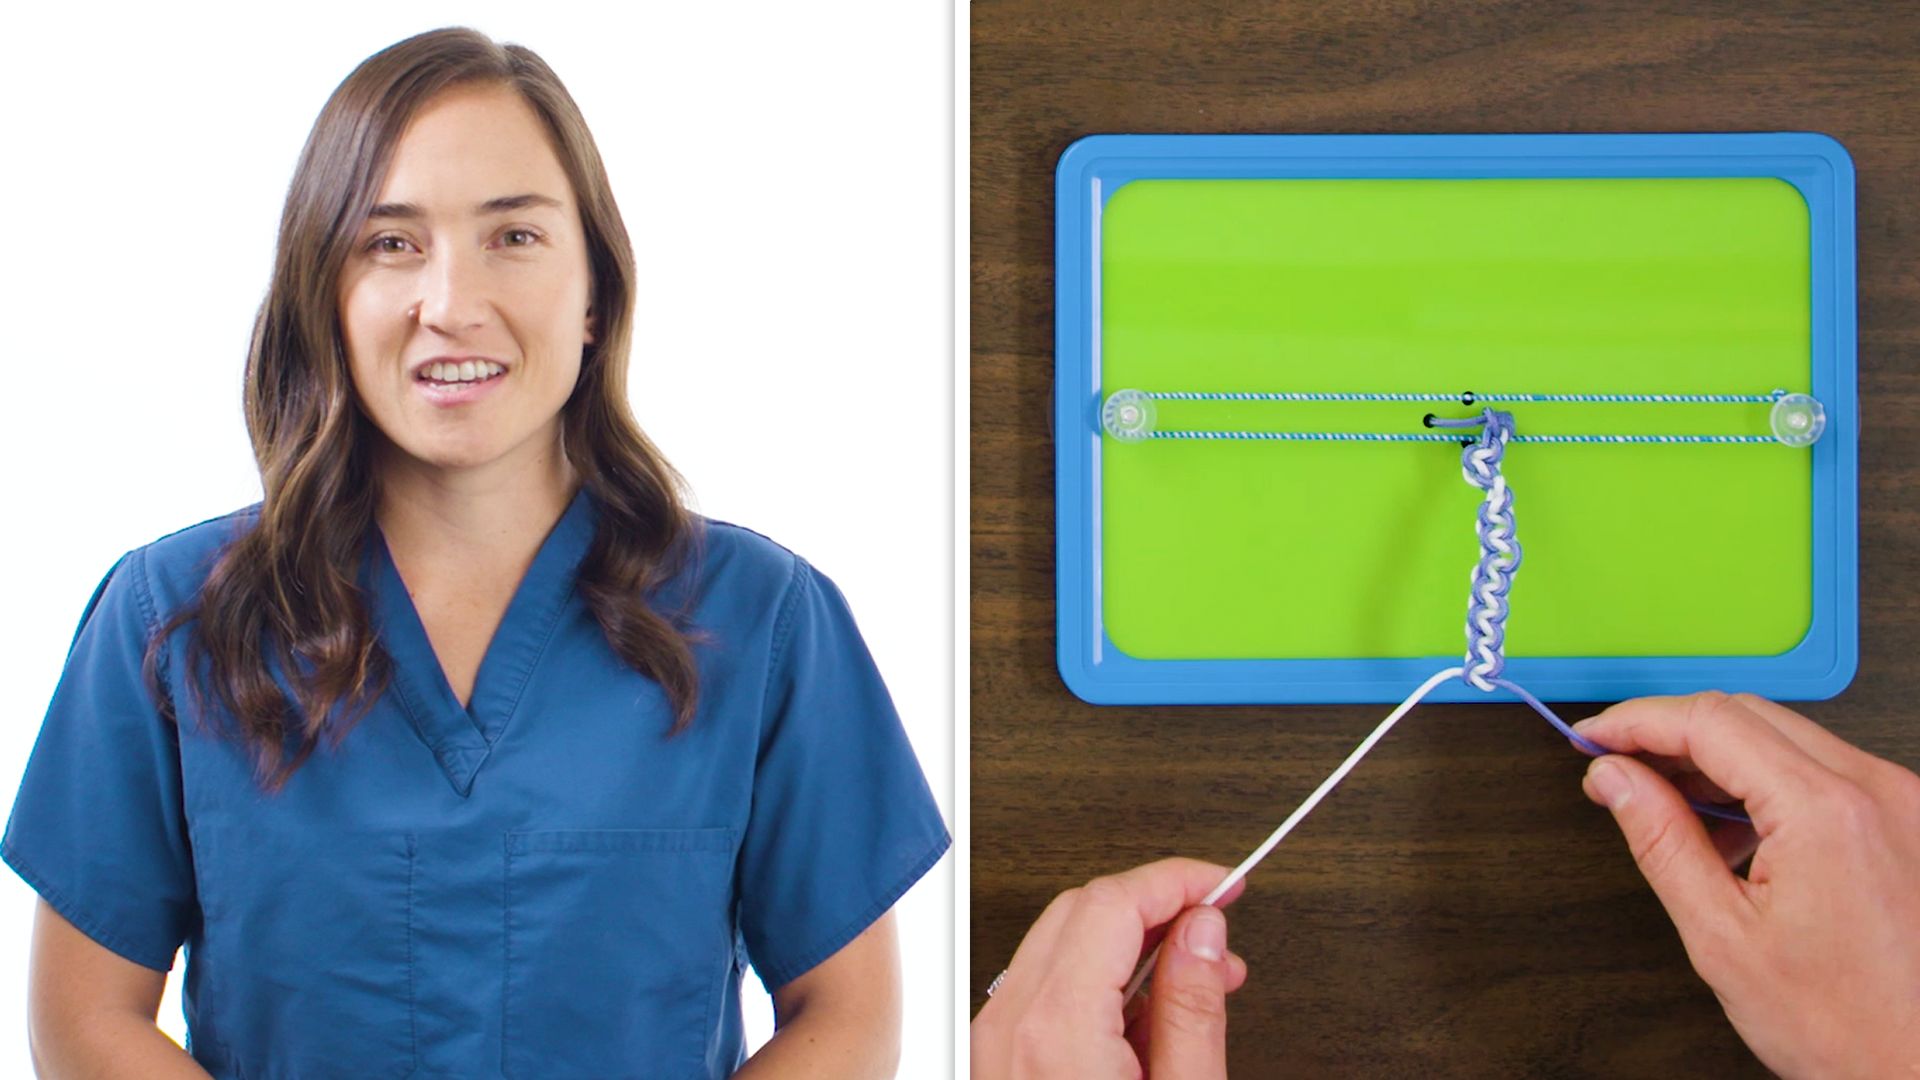 Build a DIY Knot Tying Station to Practice Your Knots